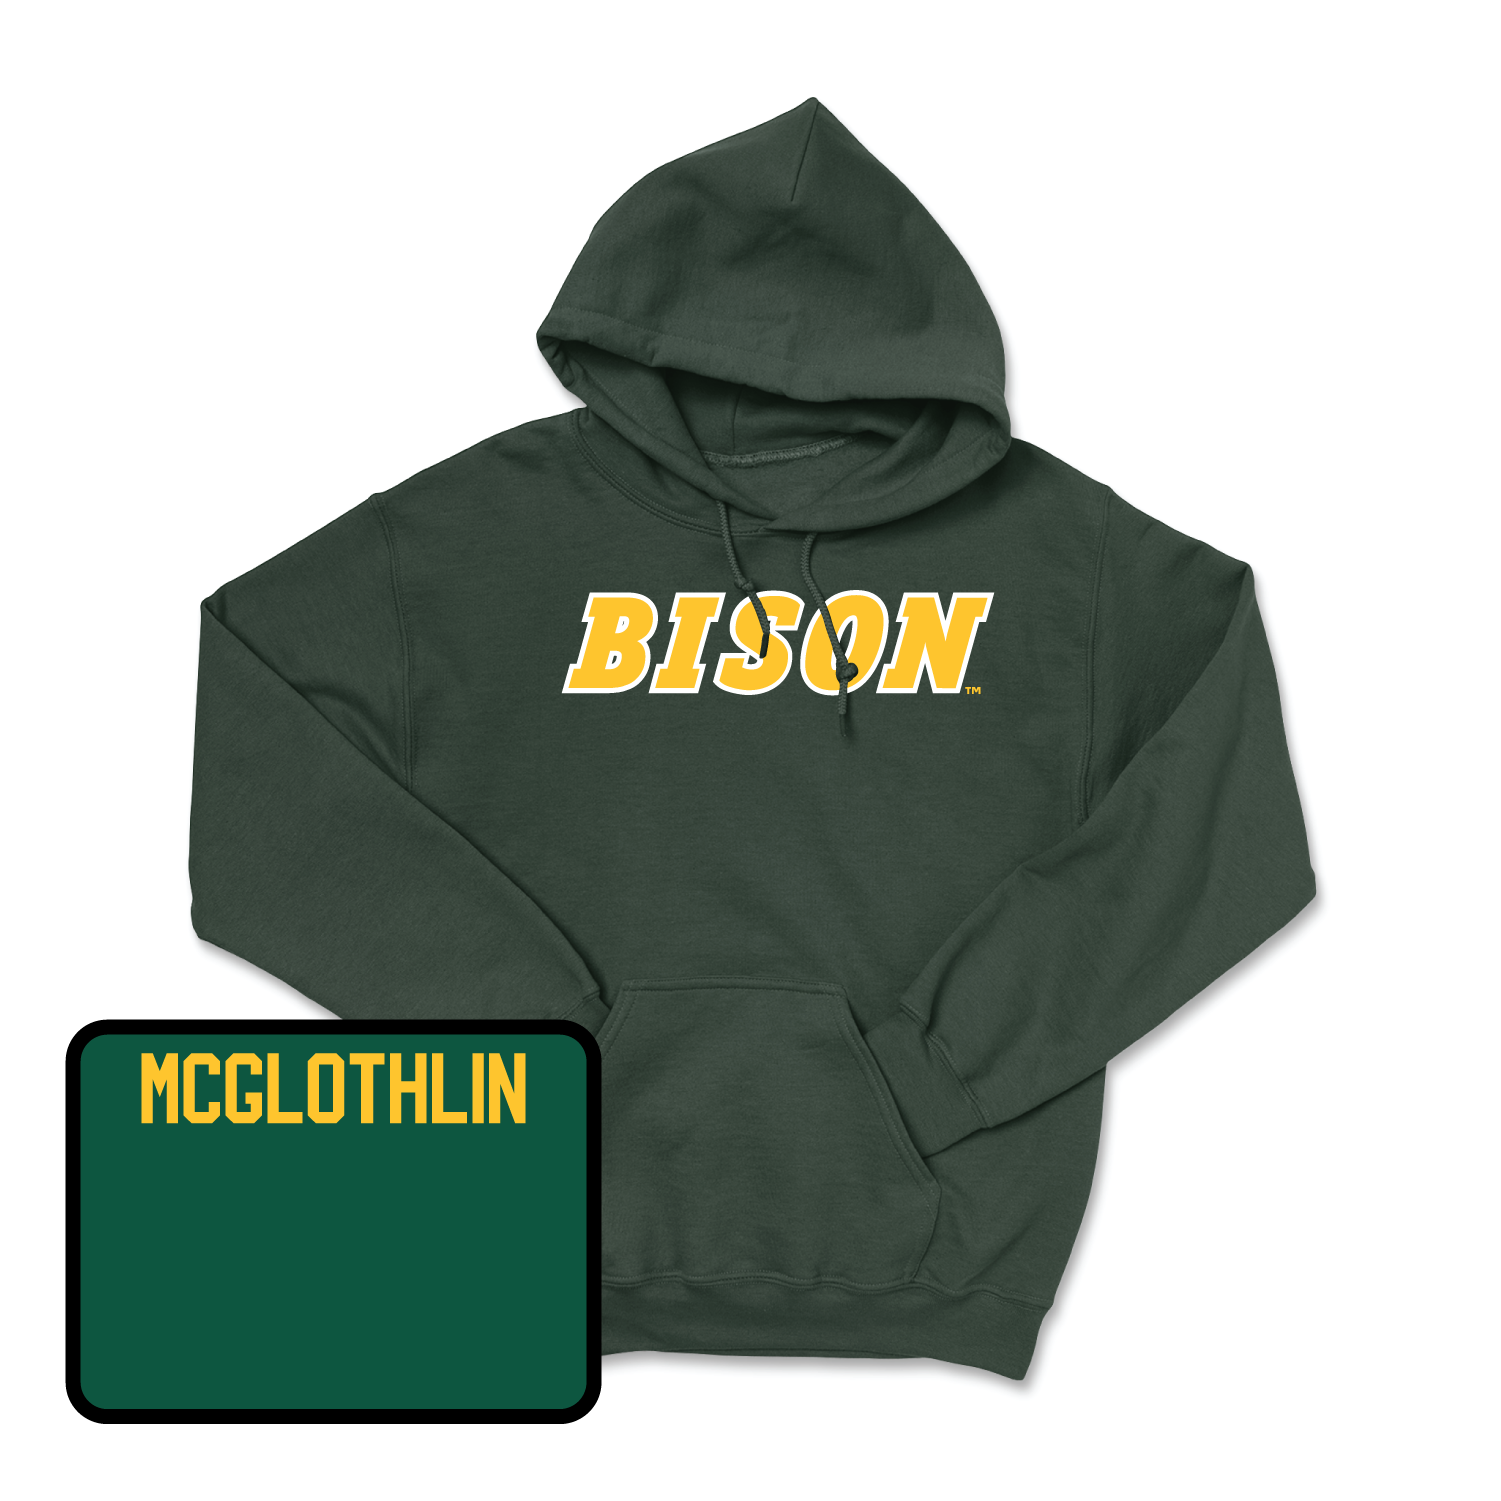 Green Track & Field Player Hoodie Youth Large / Dylan McGlothlin